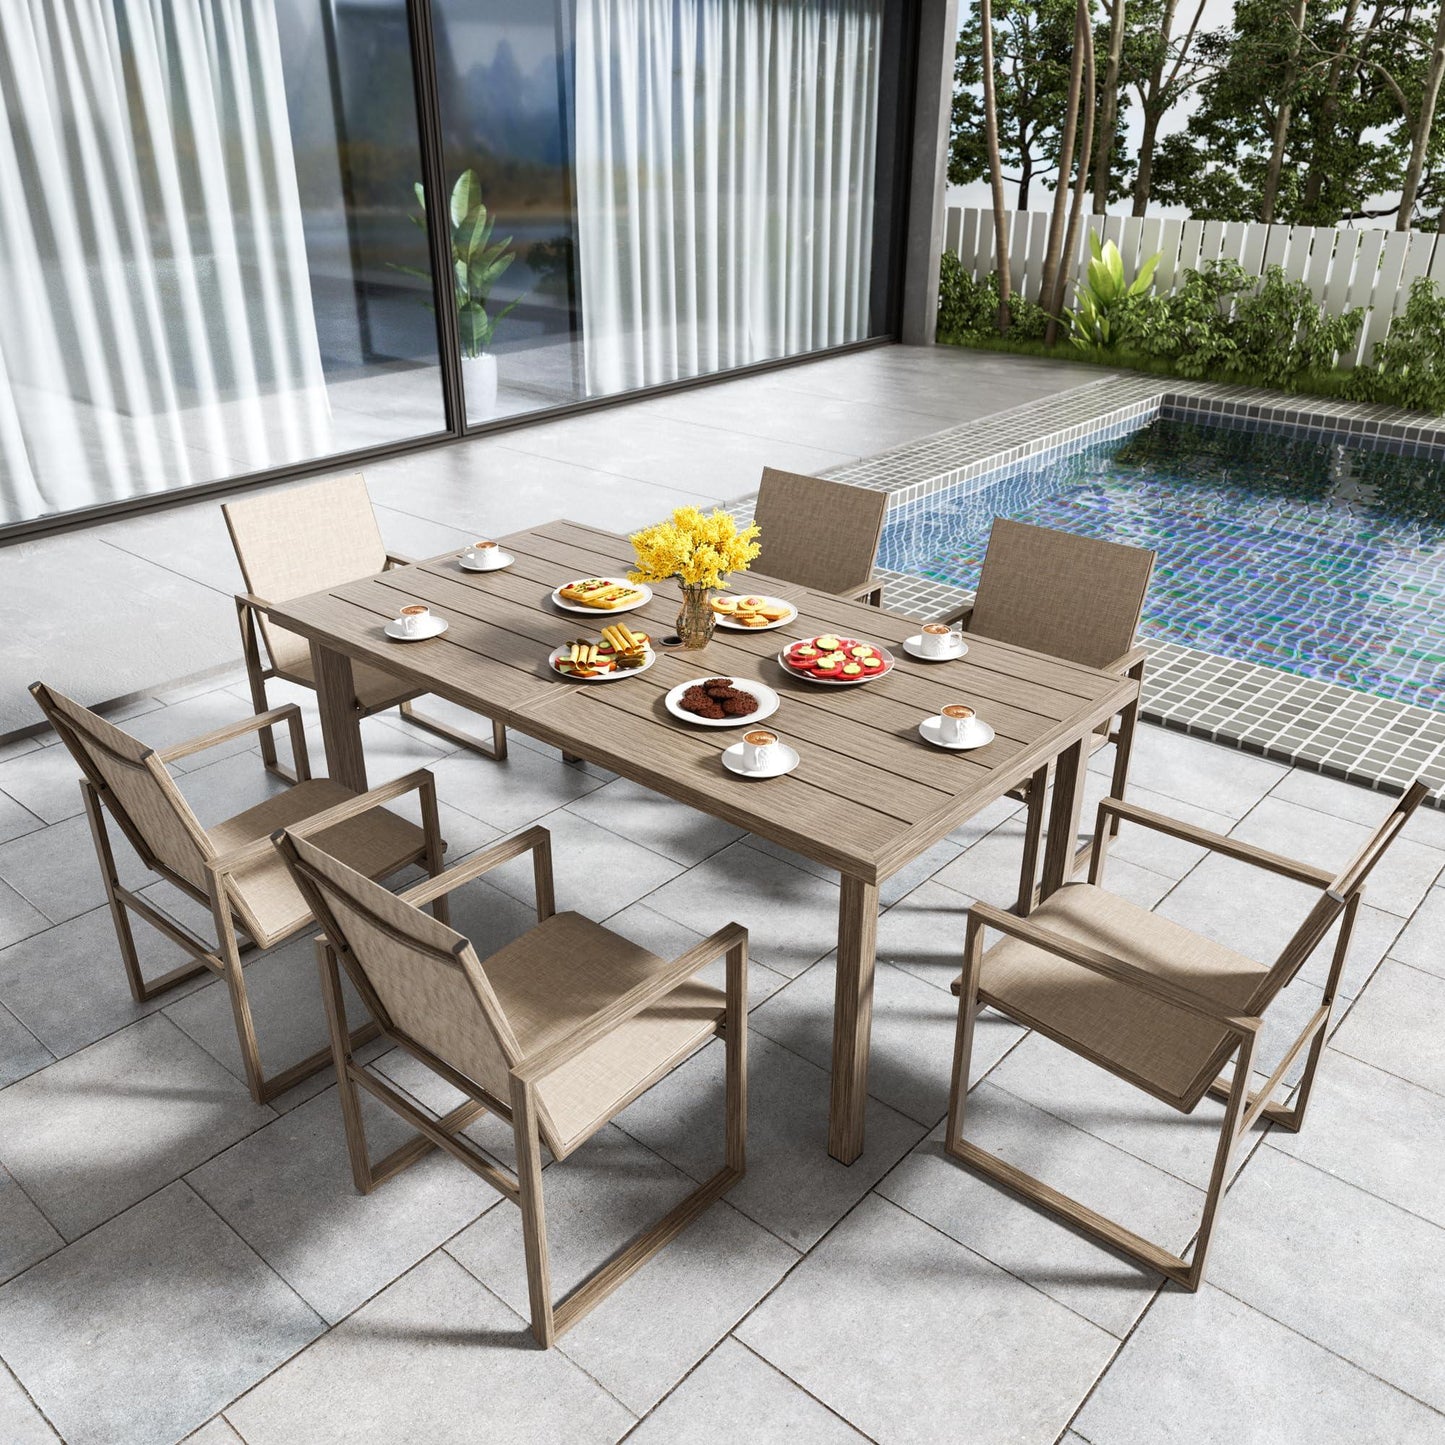 NATURAL EXPRESSIONS 7 Pieces Patio Dining Set Outdoor Furniture,70’’ Dining Table and 6 Sling Chairs with 1.65'' Umbrella Hole for Backyard Garden Poolside Porch - CookCave